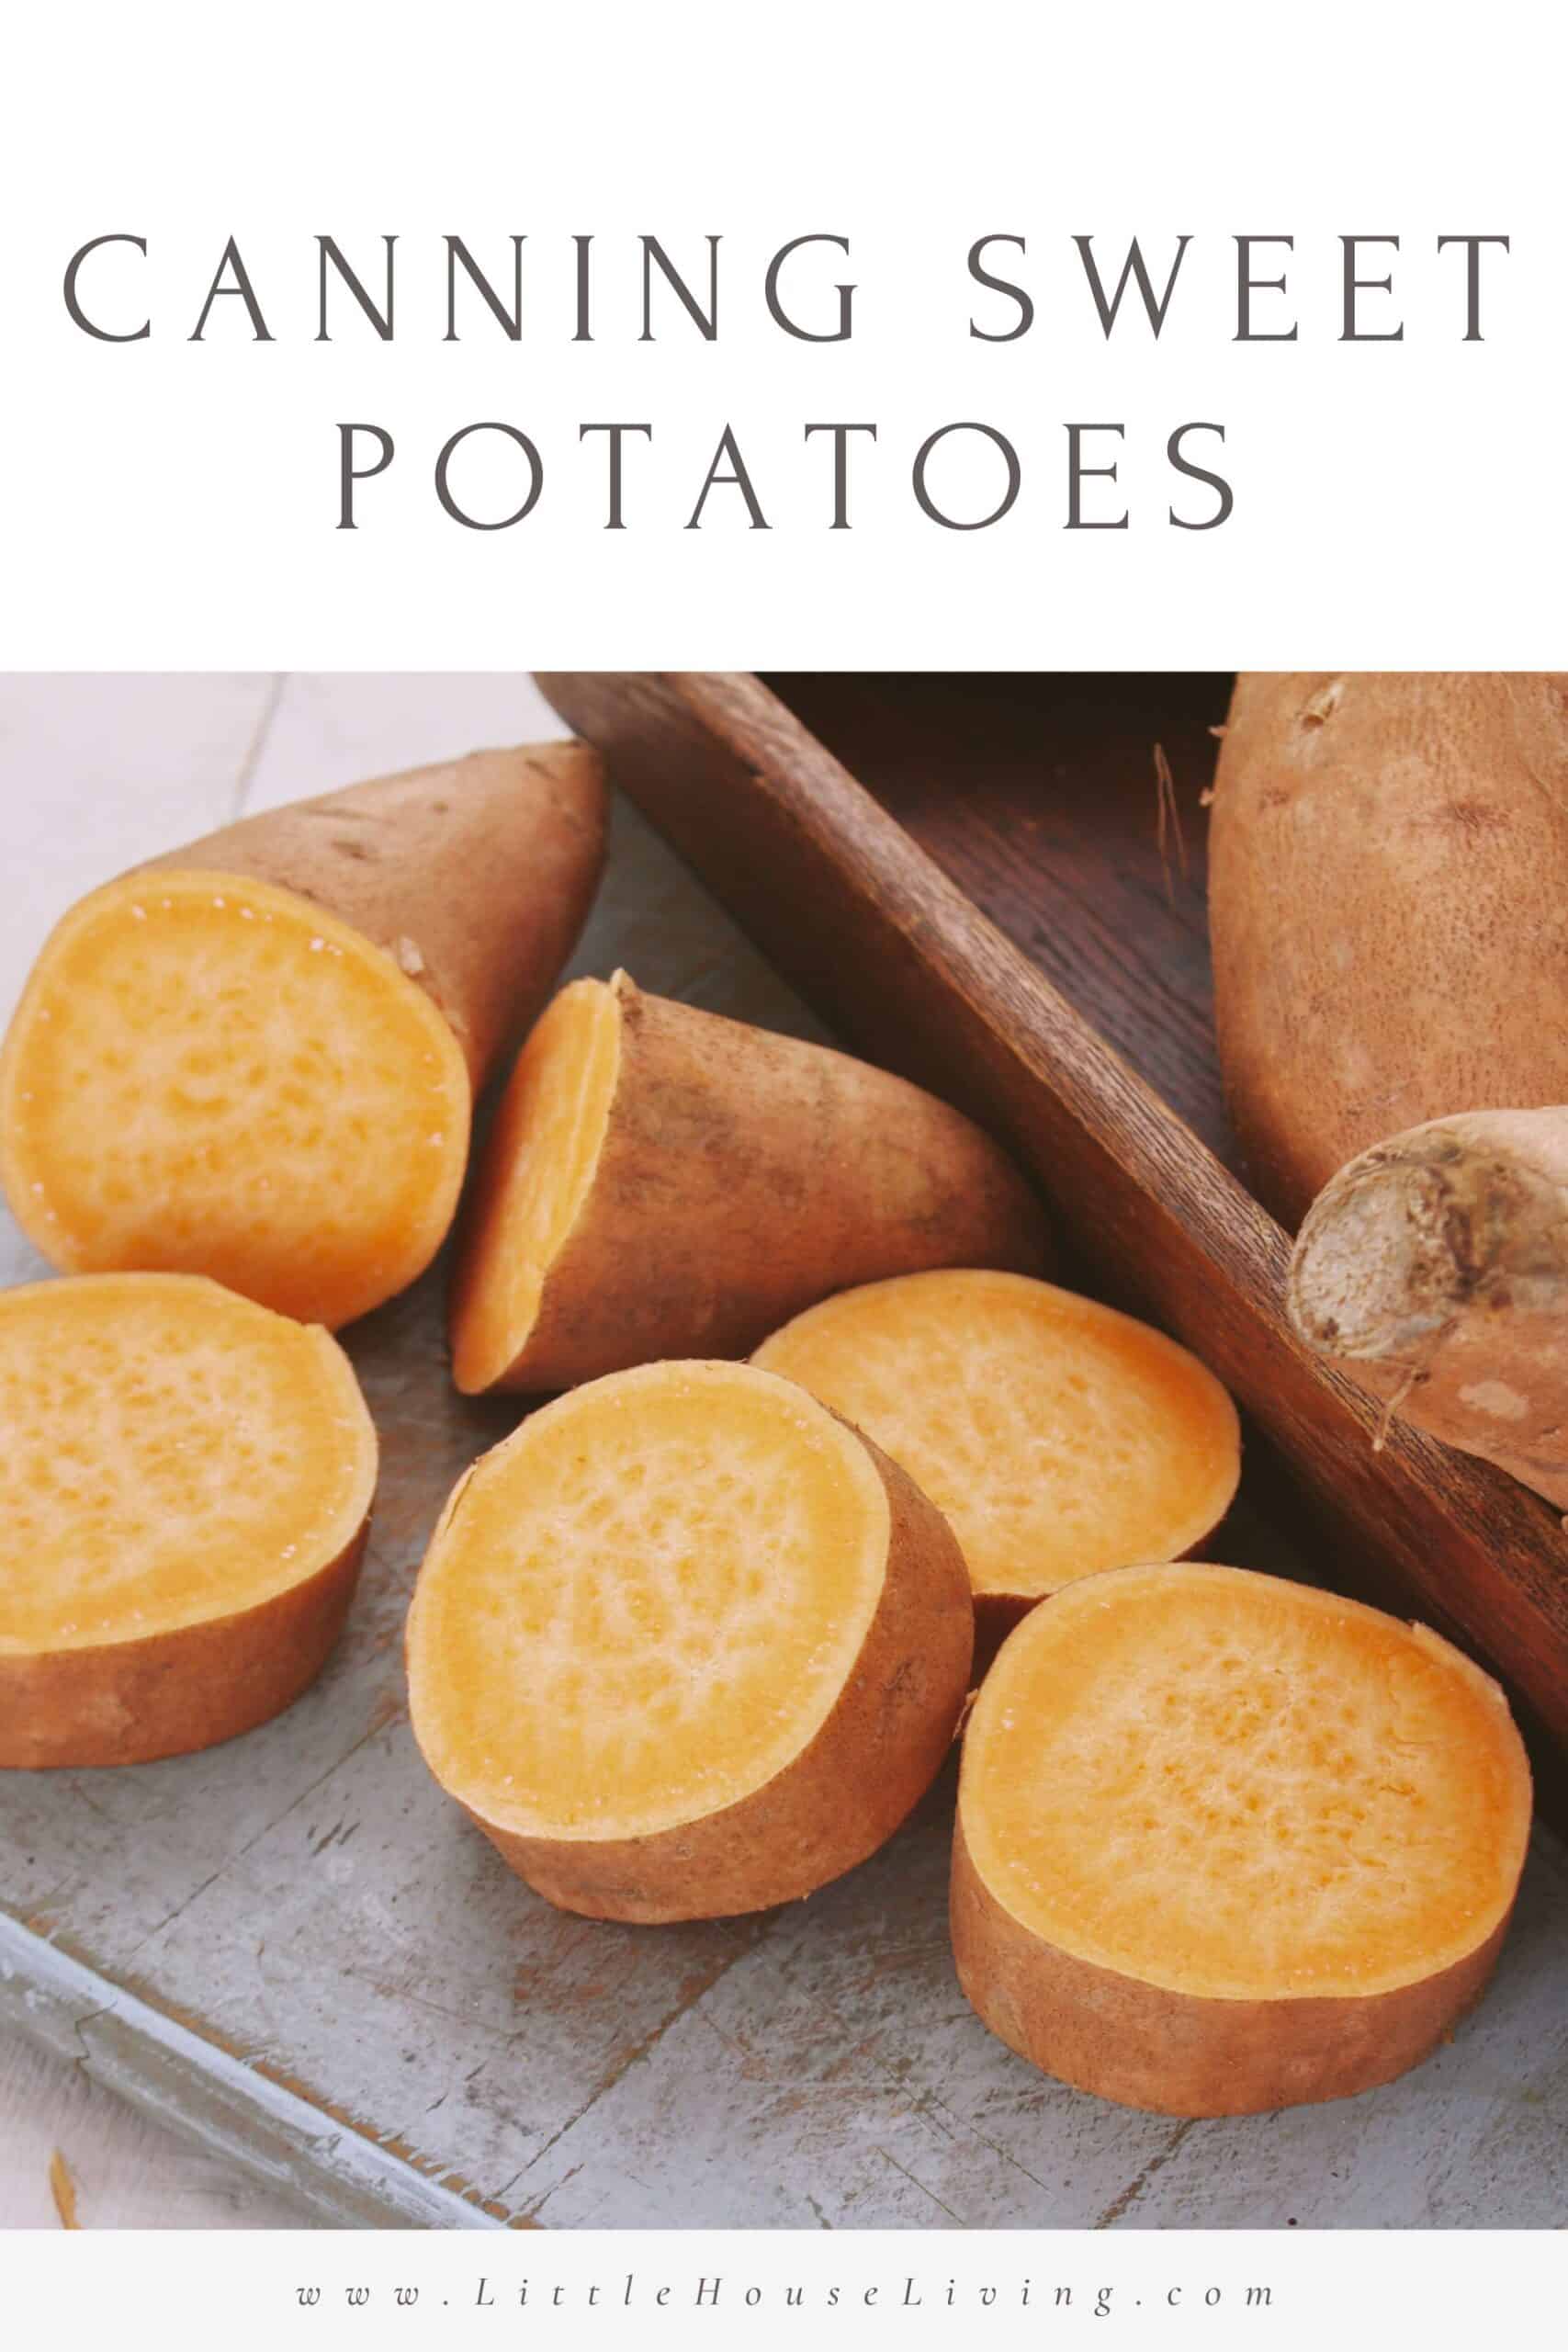 The method for canning sweet potatoes is very simple.